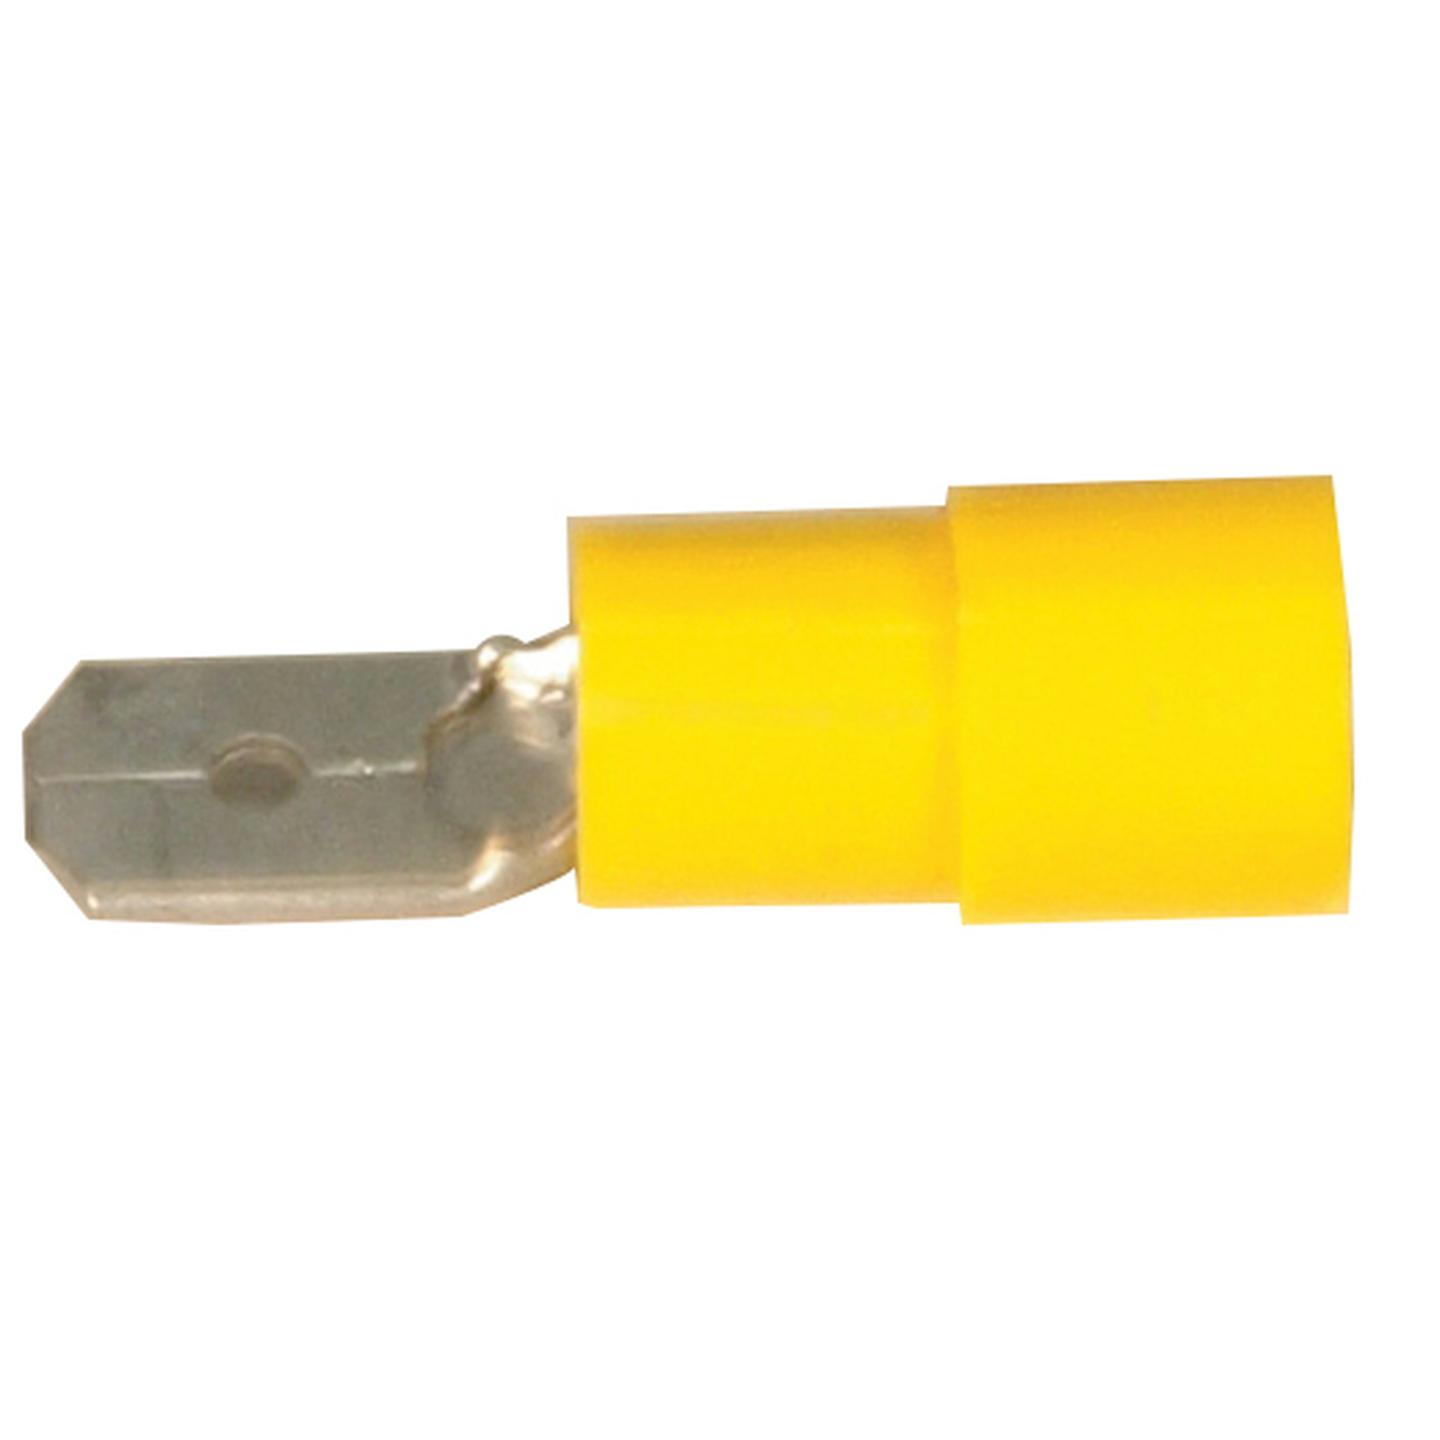 Male Spade - Yellow - Pack of 100